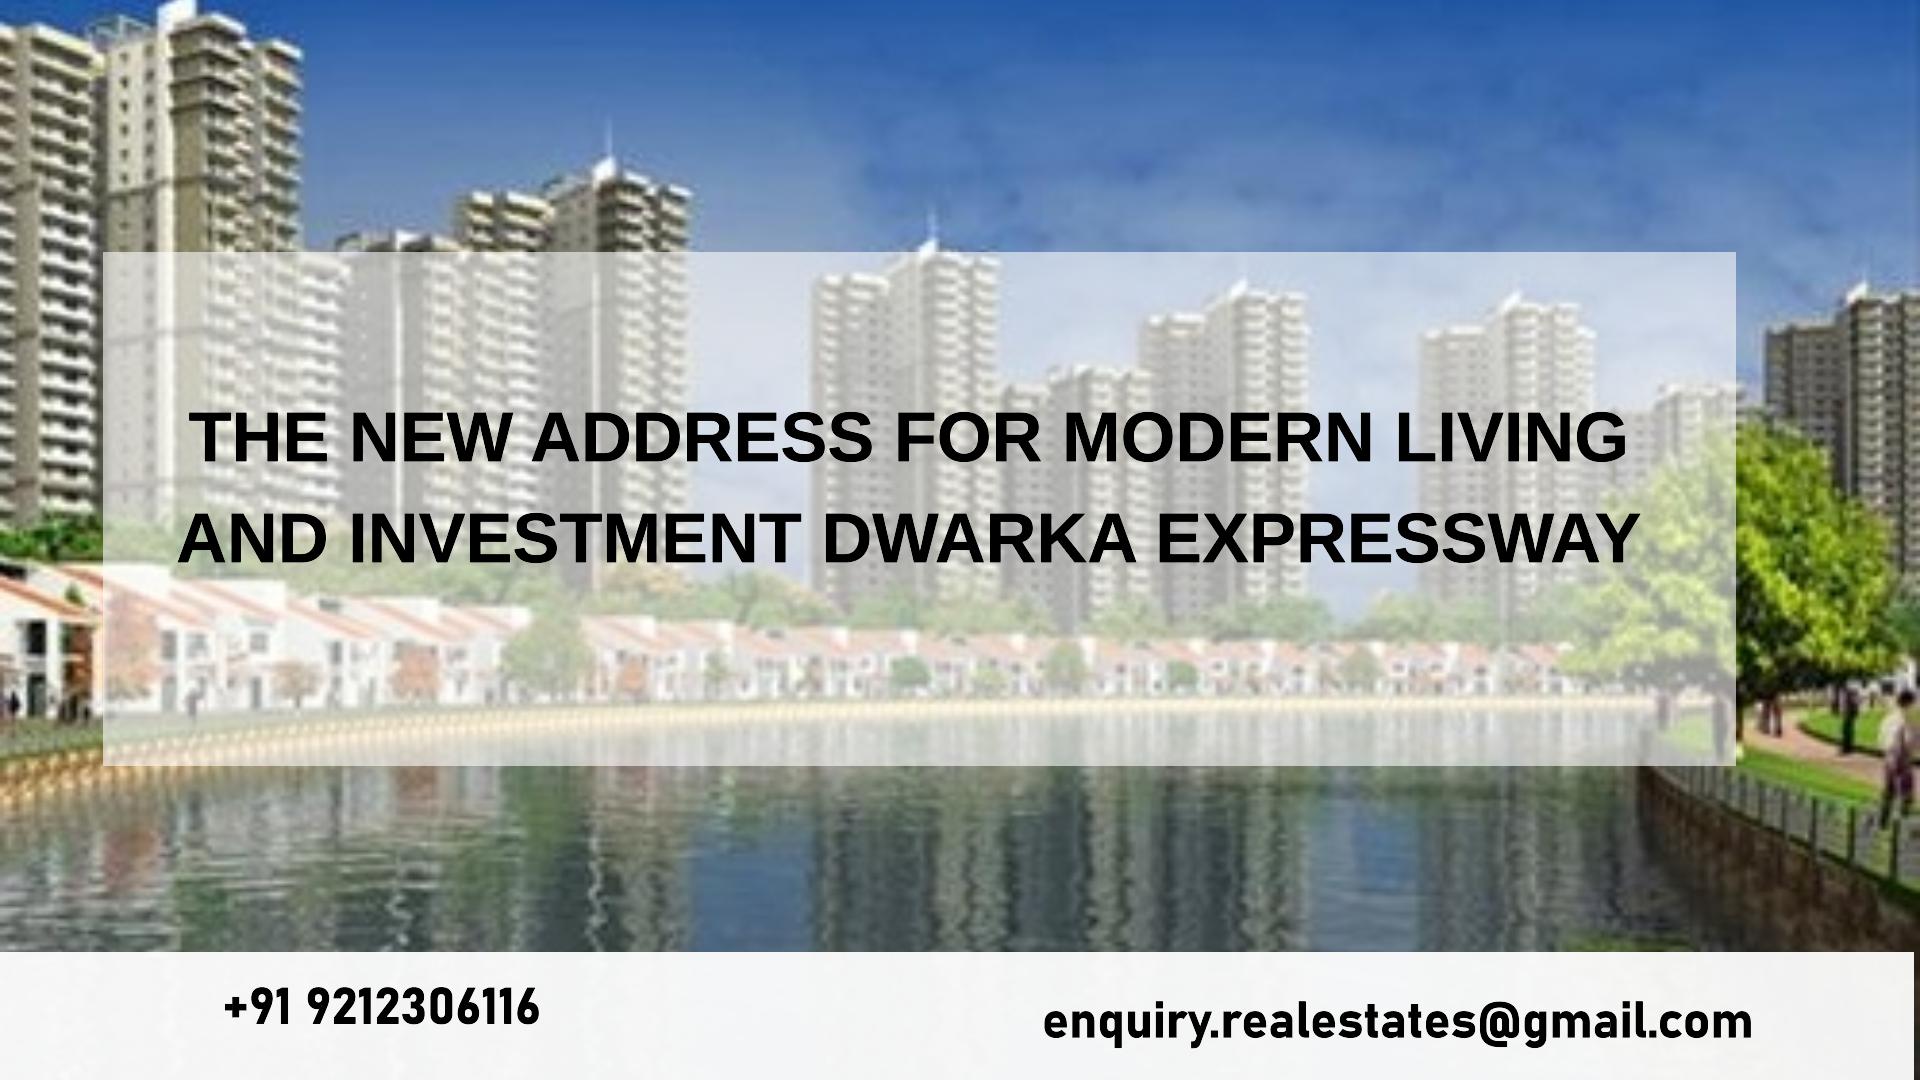 The New Address for Modern Living and Investment Dwarka Expressway